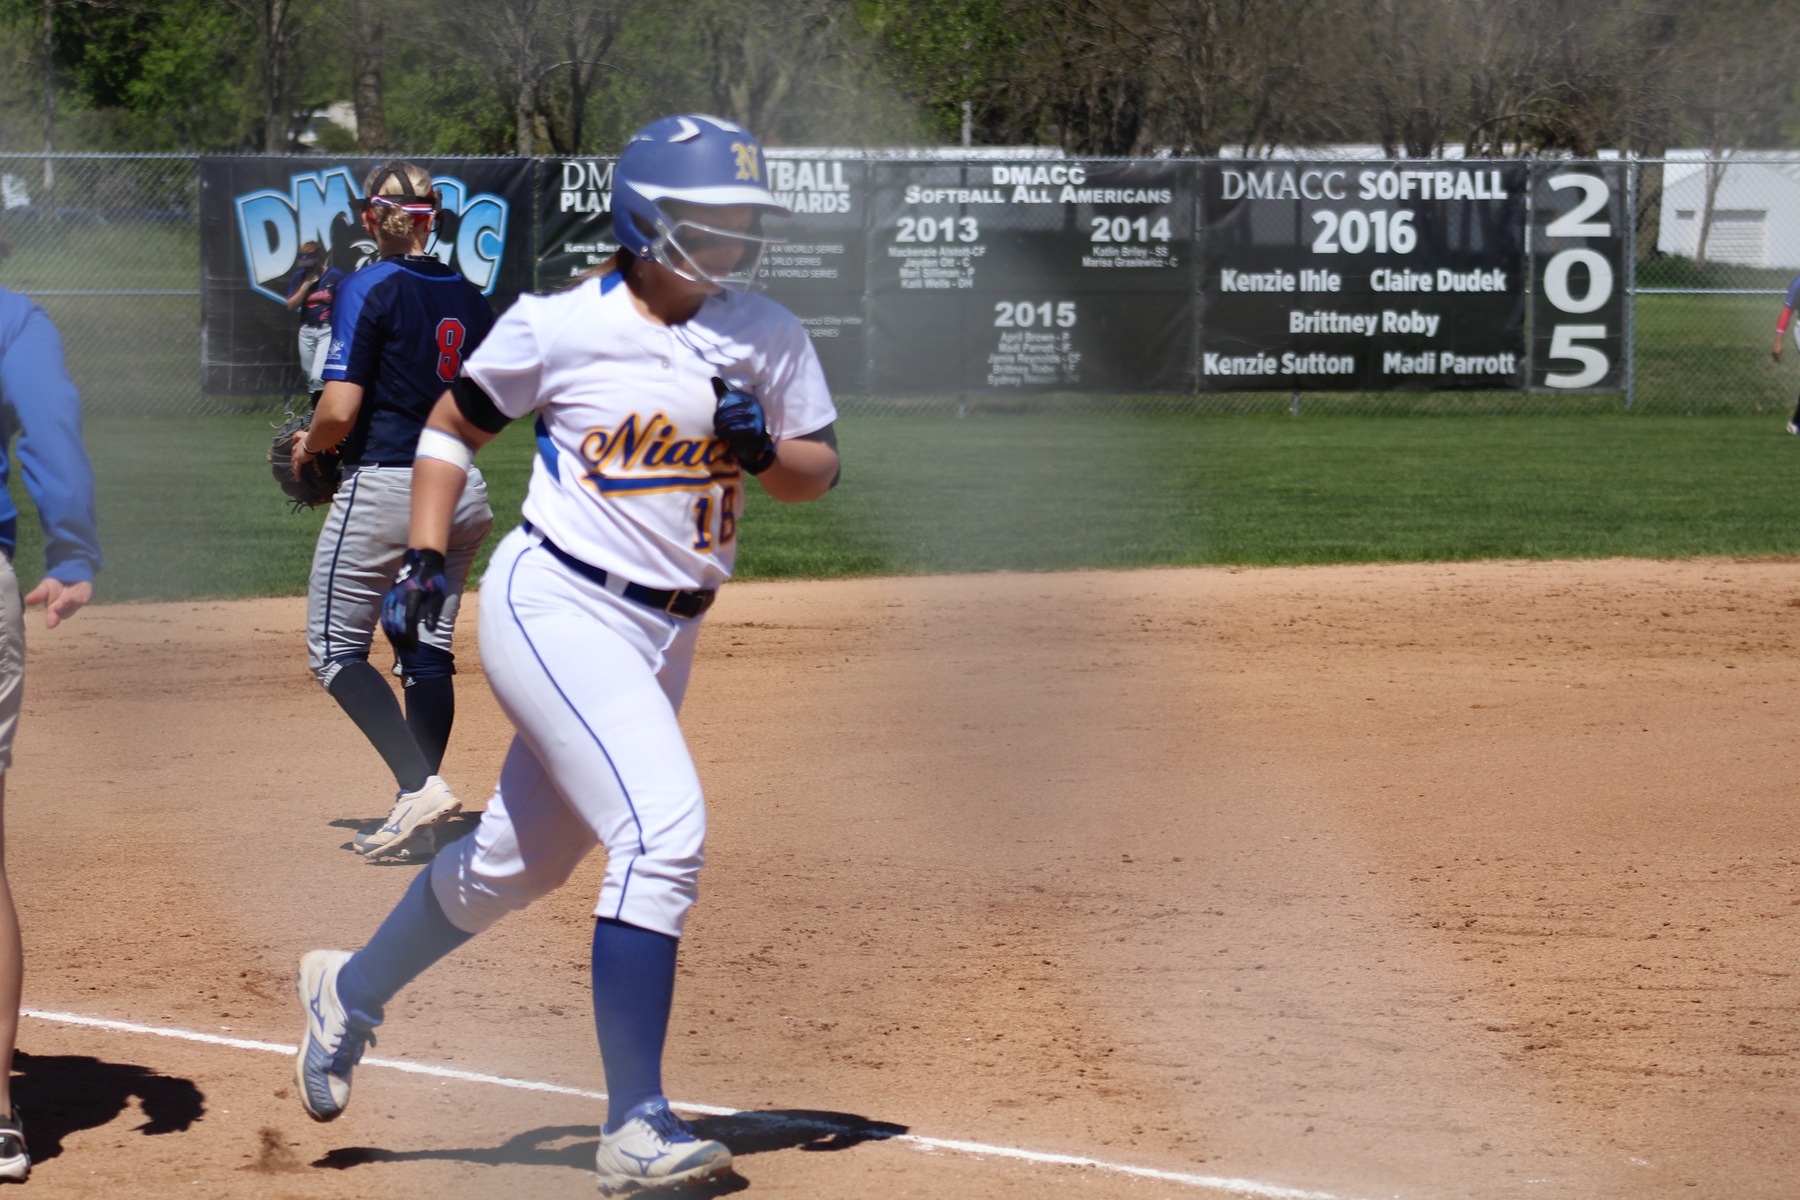 NIACC's Shelby Low rounds third base after hitting a home run in the fifth inning on Tuesday against DMACC.